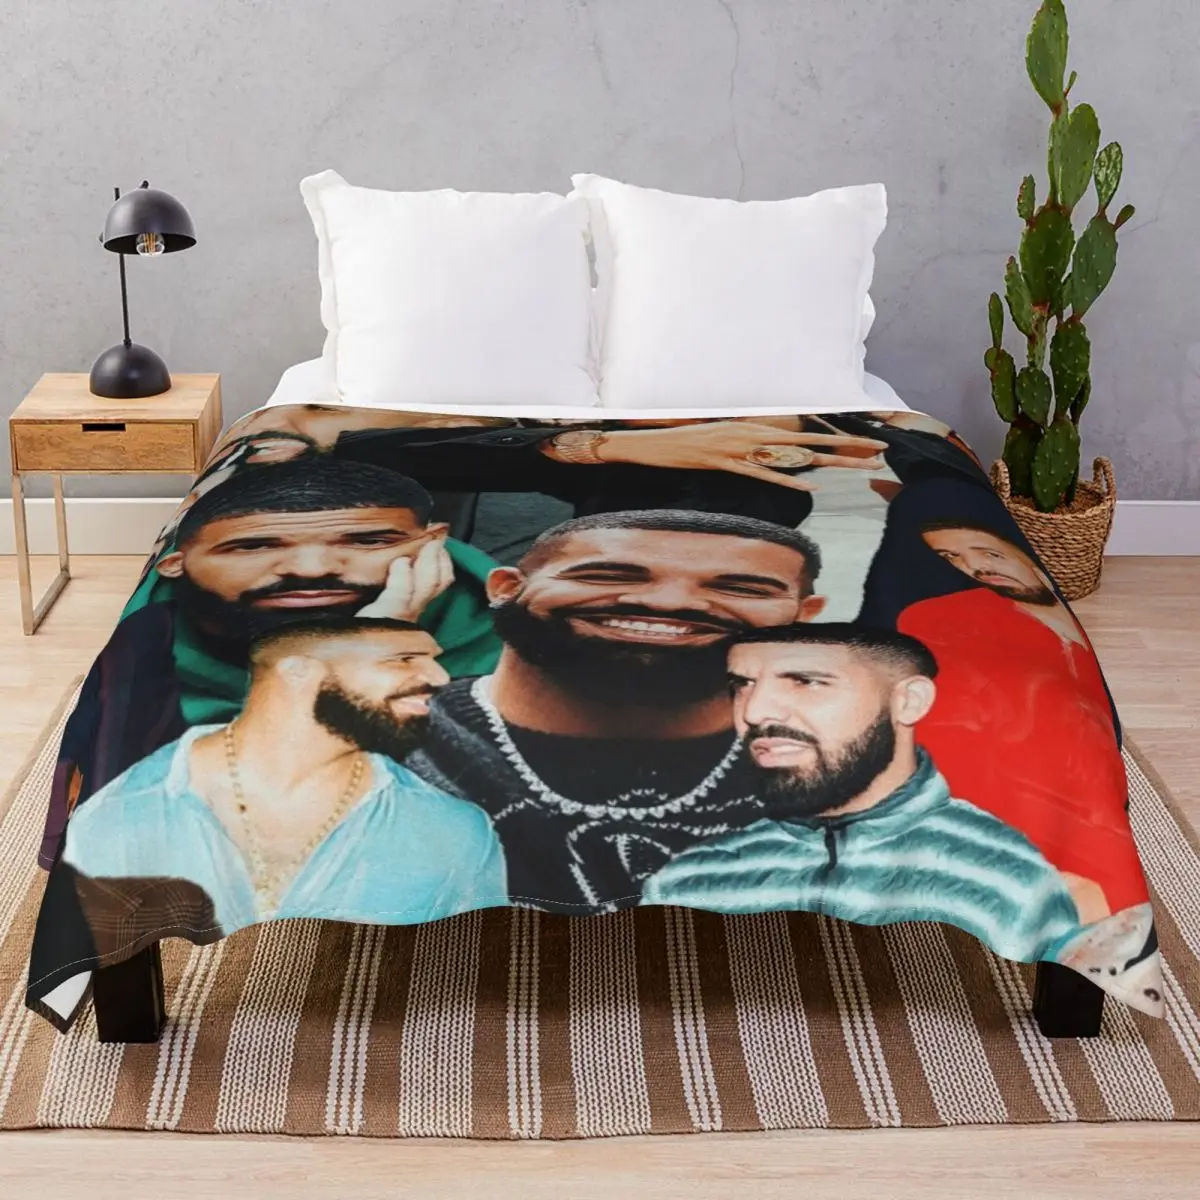 Drake Collage Blankets Flannel Plush Decoration Super Soft Throw Blanket for Bedding Home Couch Camp Cinema